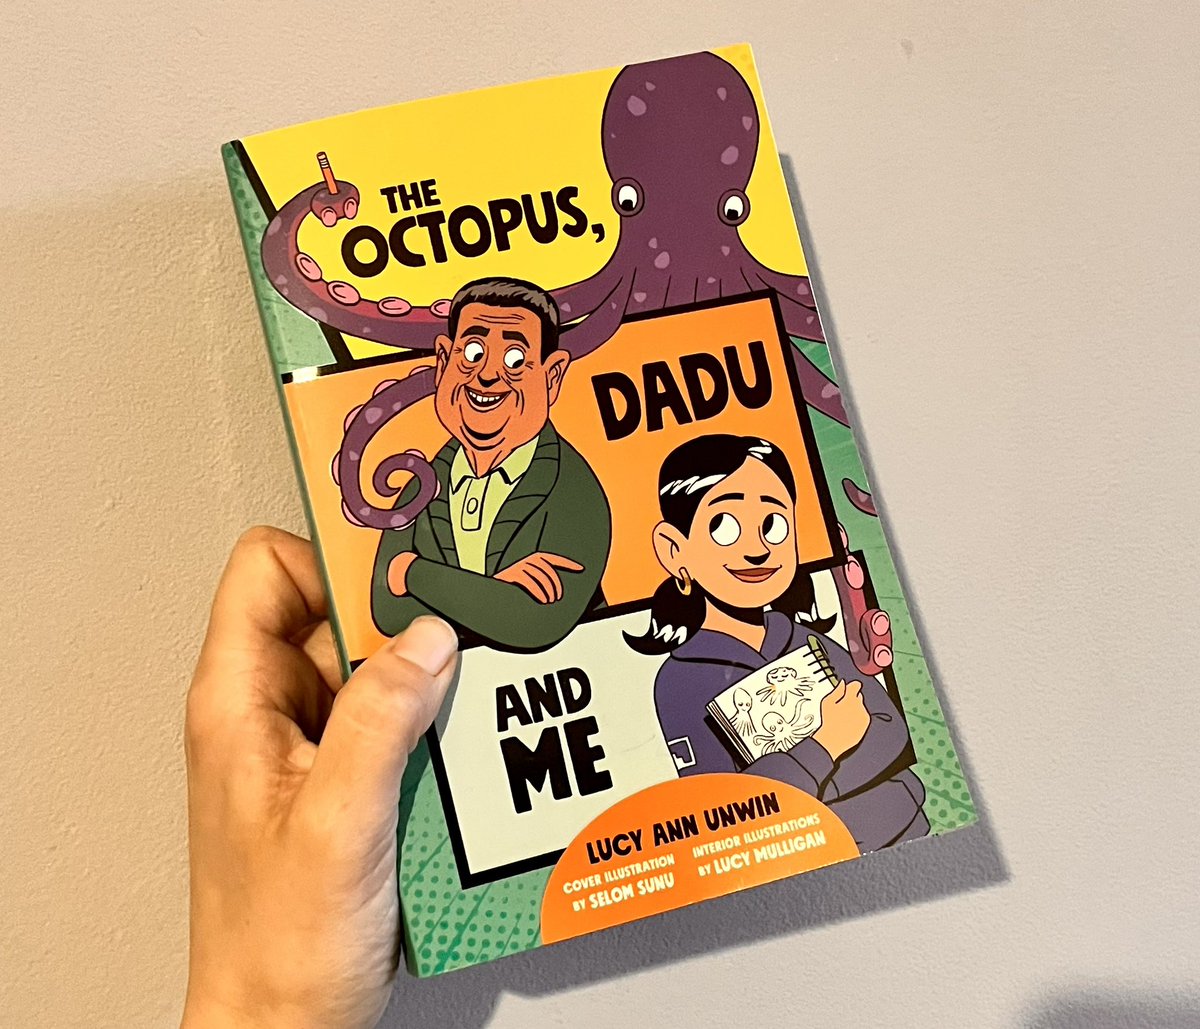 My first read of 2023 is #TheOctopusDaduAndMe by @LucyAnnUnwin, cover by @MrSunu, interior illustrations by #LucyMulligan

A wonderful read exploring a girl’s grief over her Dadu’s dementia which manages to to funny and heart-wrenching all at the same time 🐙